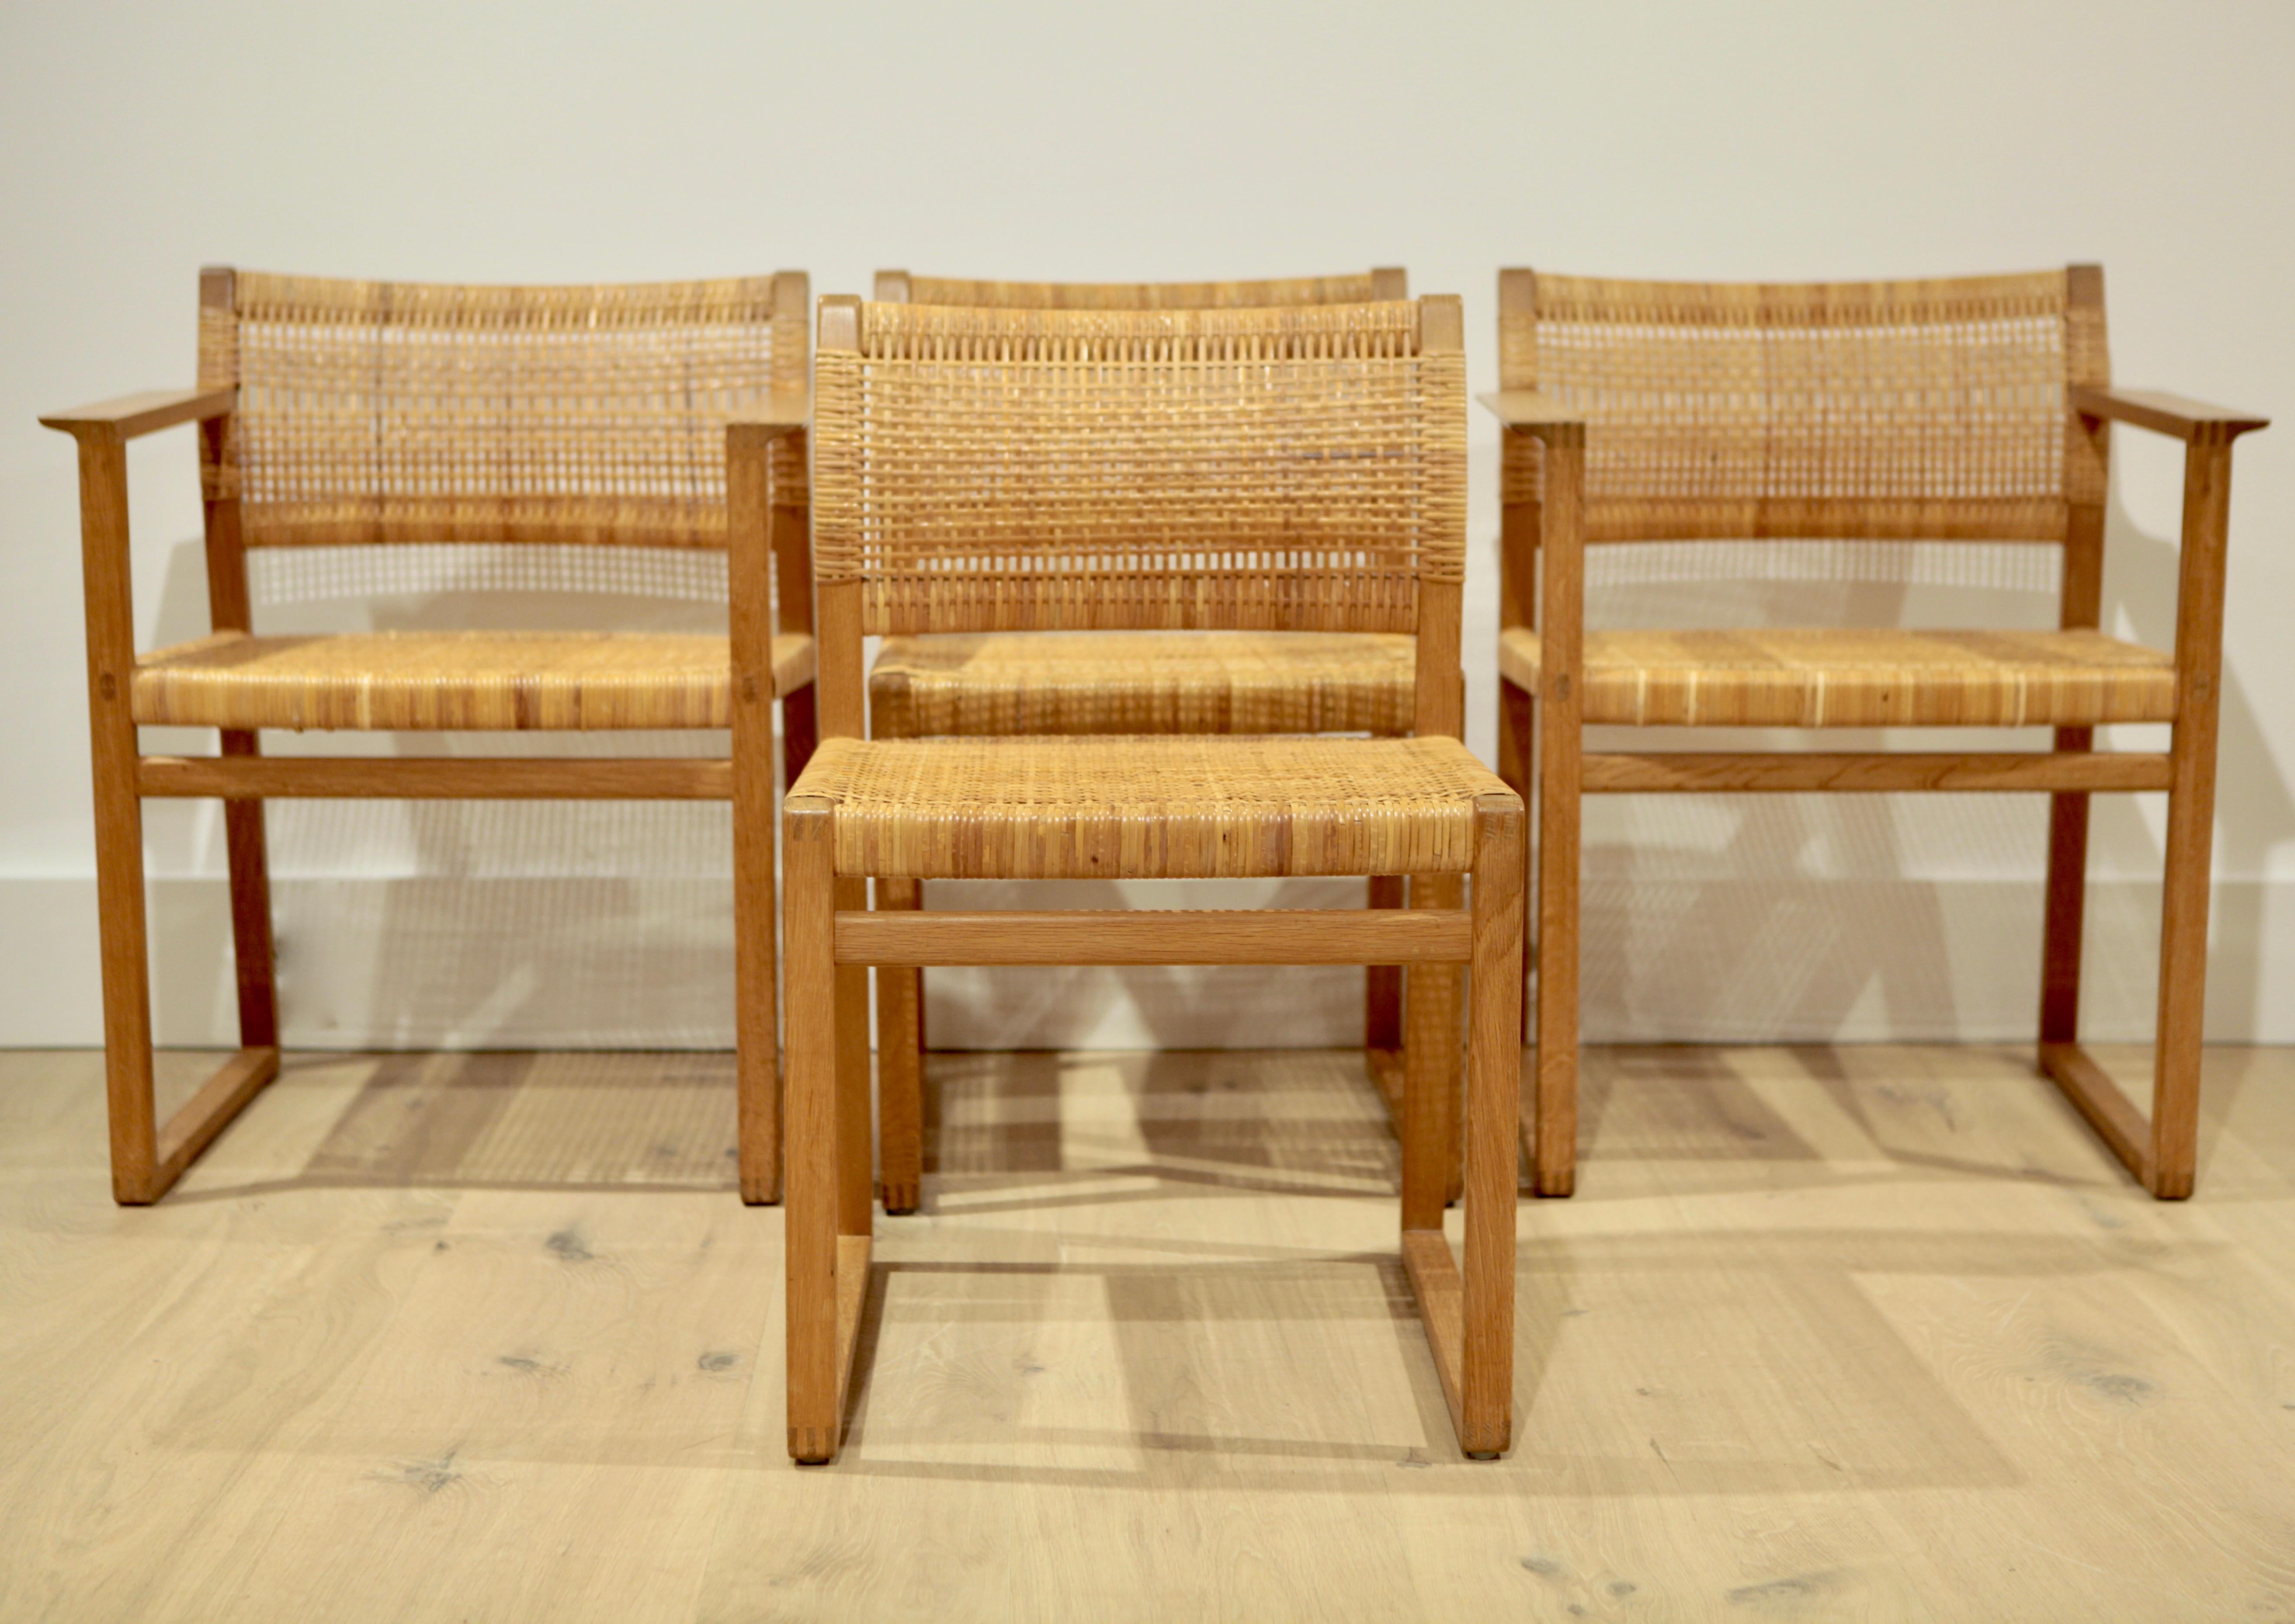 A set of 4 Børge Mogensen dining chairs BM 61 and BM 62 in solid oak and woven cane from 1957.
Manufactured by Frederica Stolefabrik in Denmark.